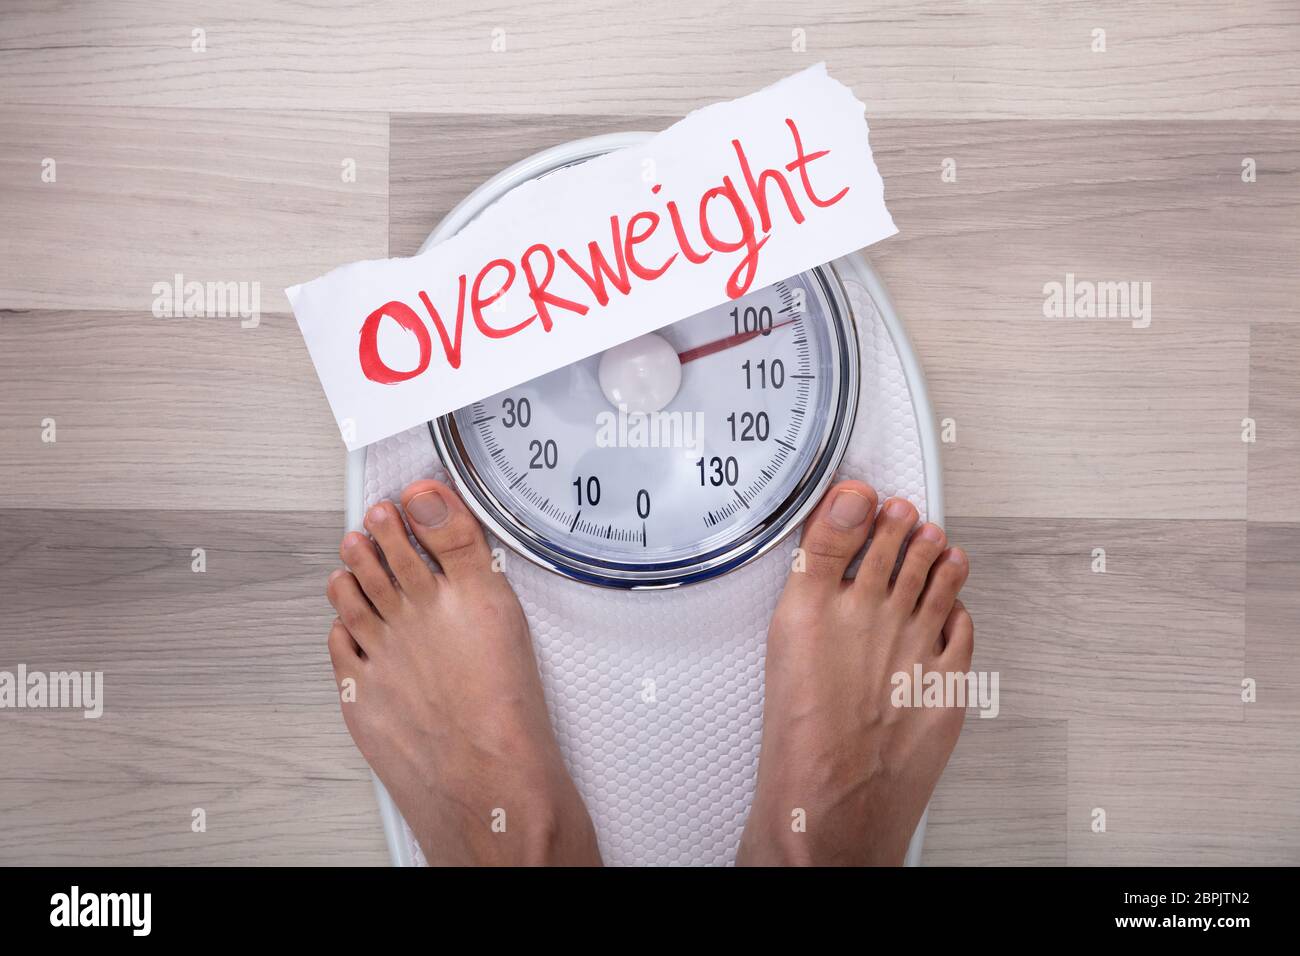 Close-up Of Woman's Feet On Weighing Scale Indicating Overweight On White Paper Stock Photo